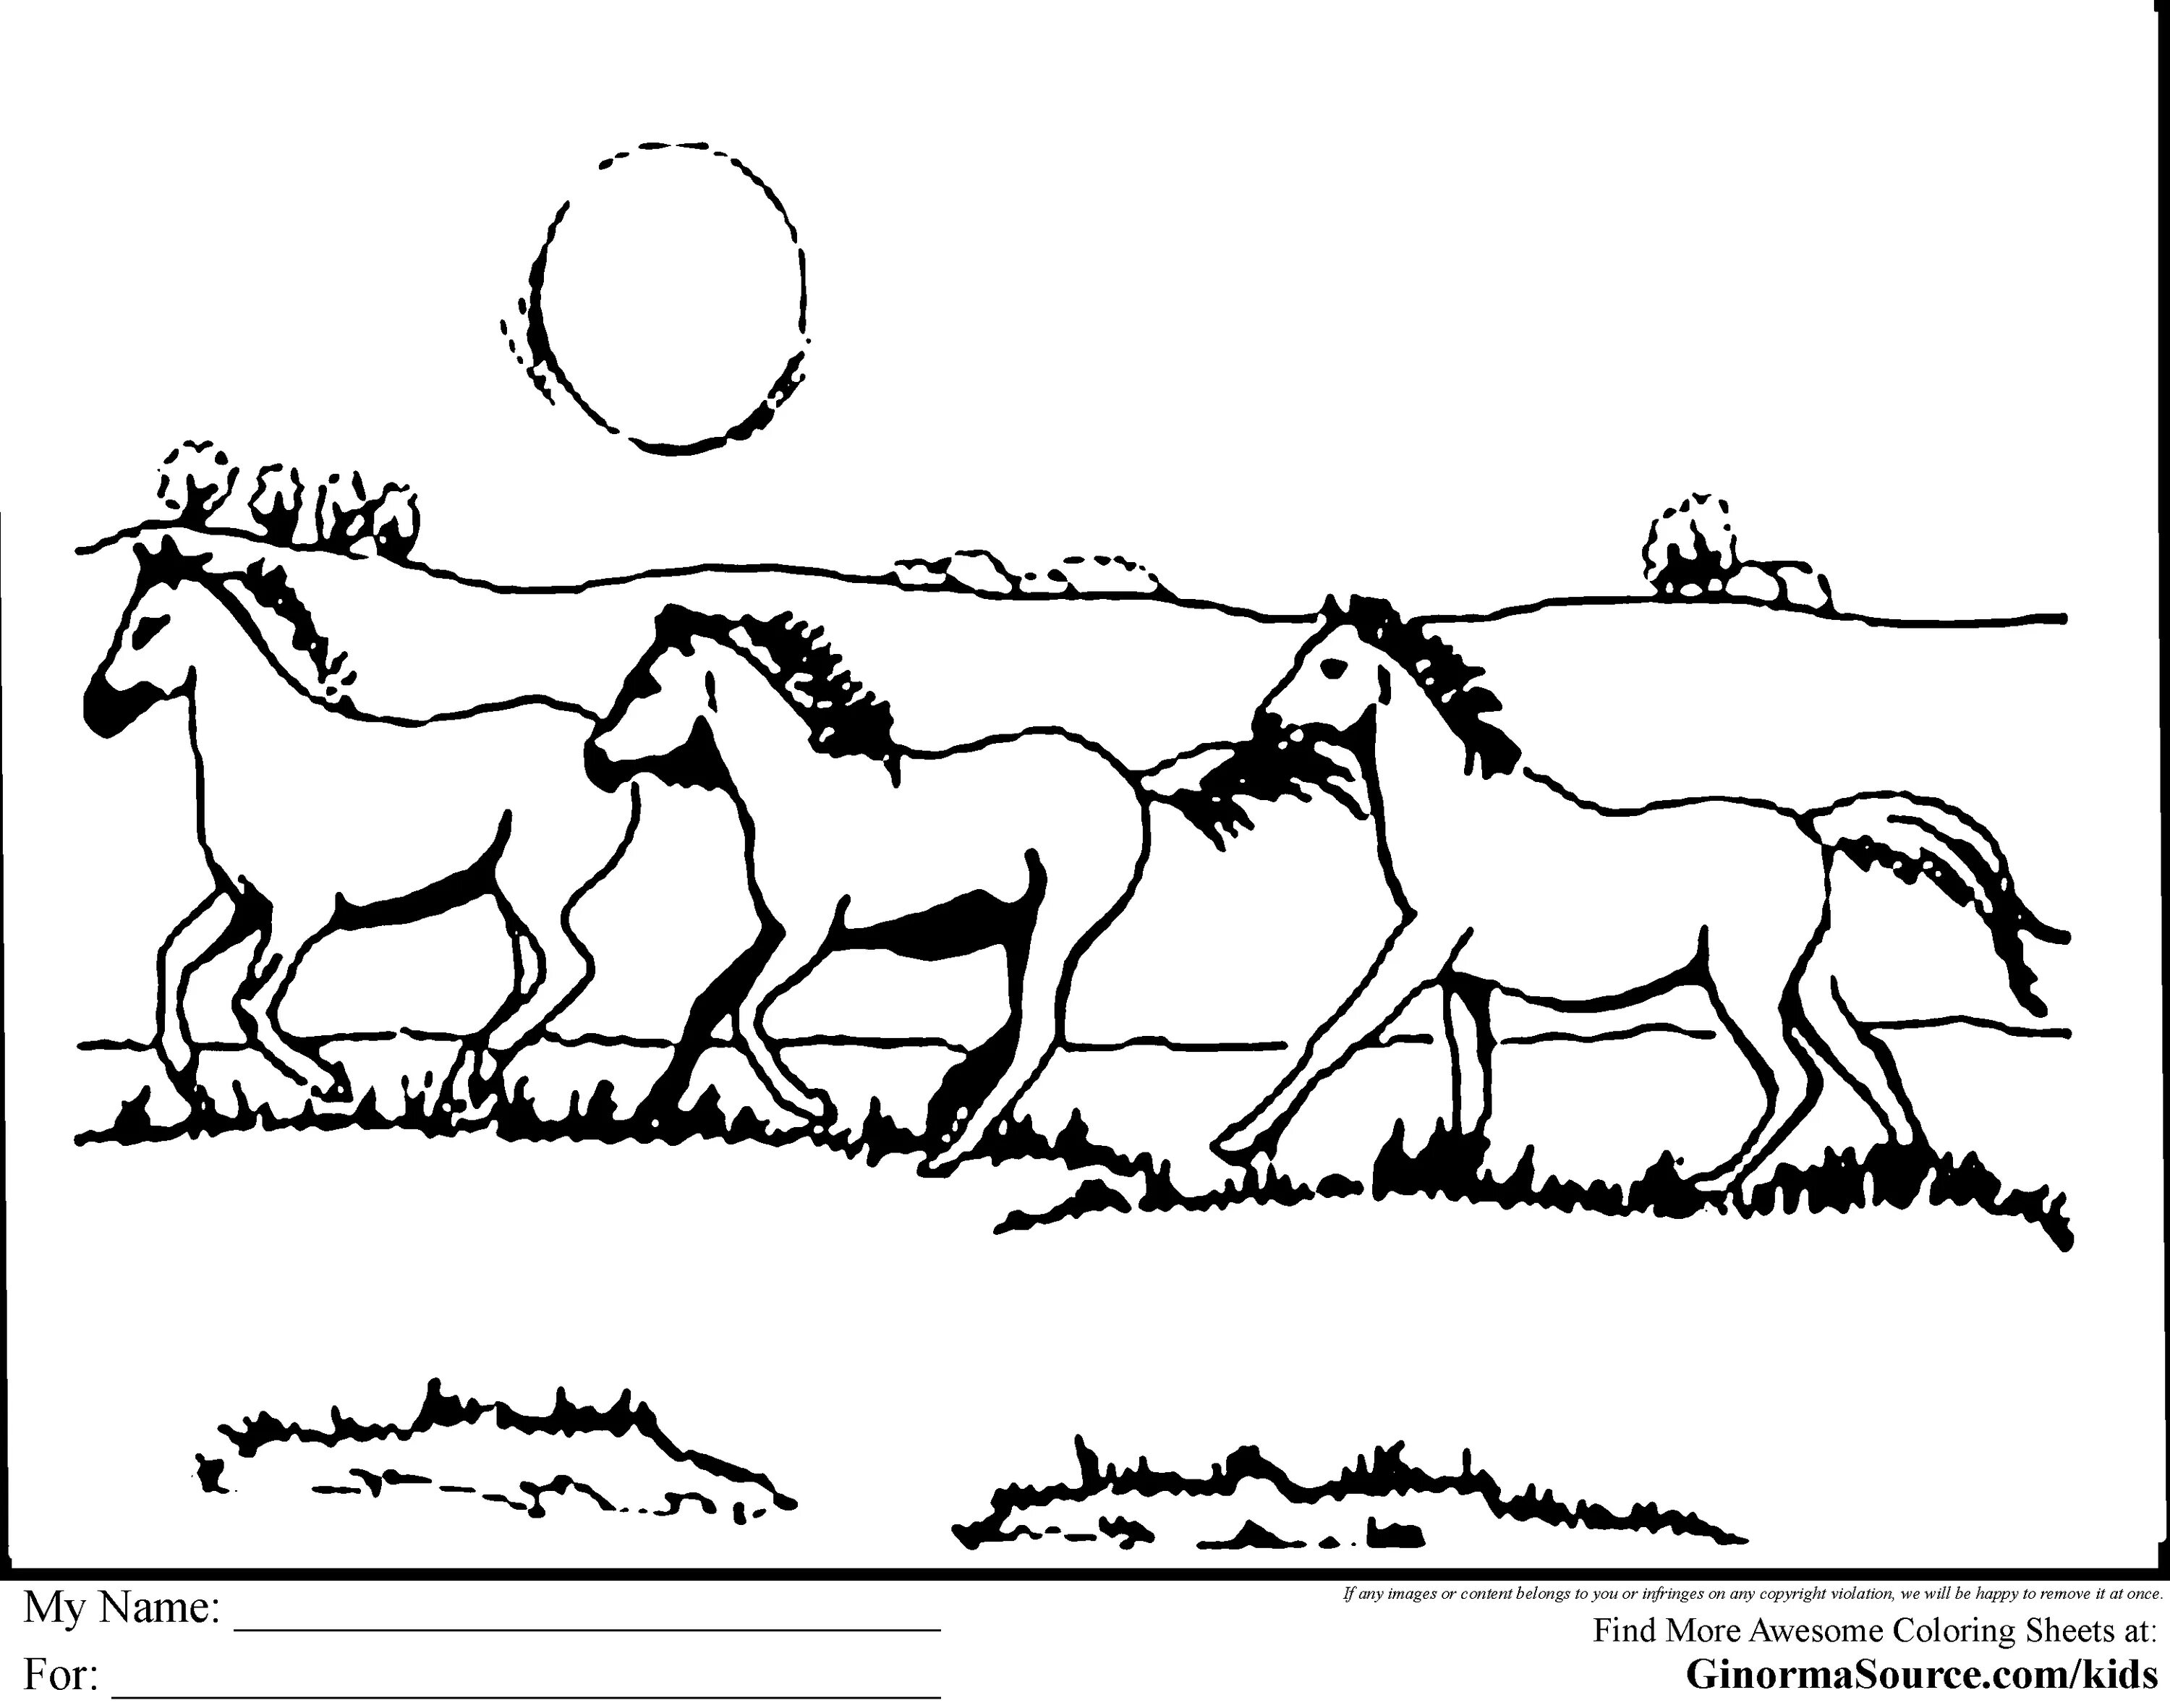 Coloring page amazing trio of horses